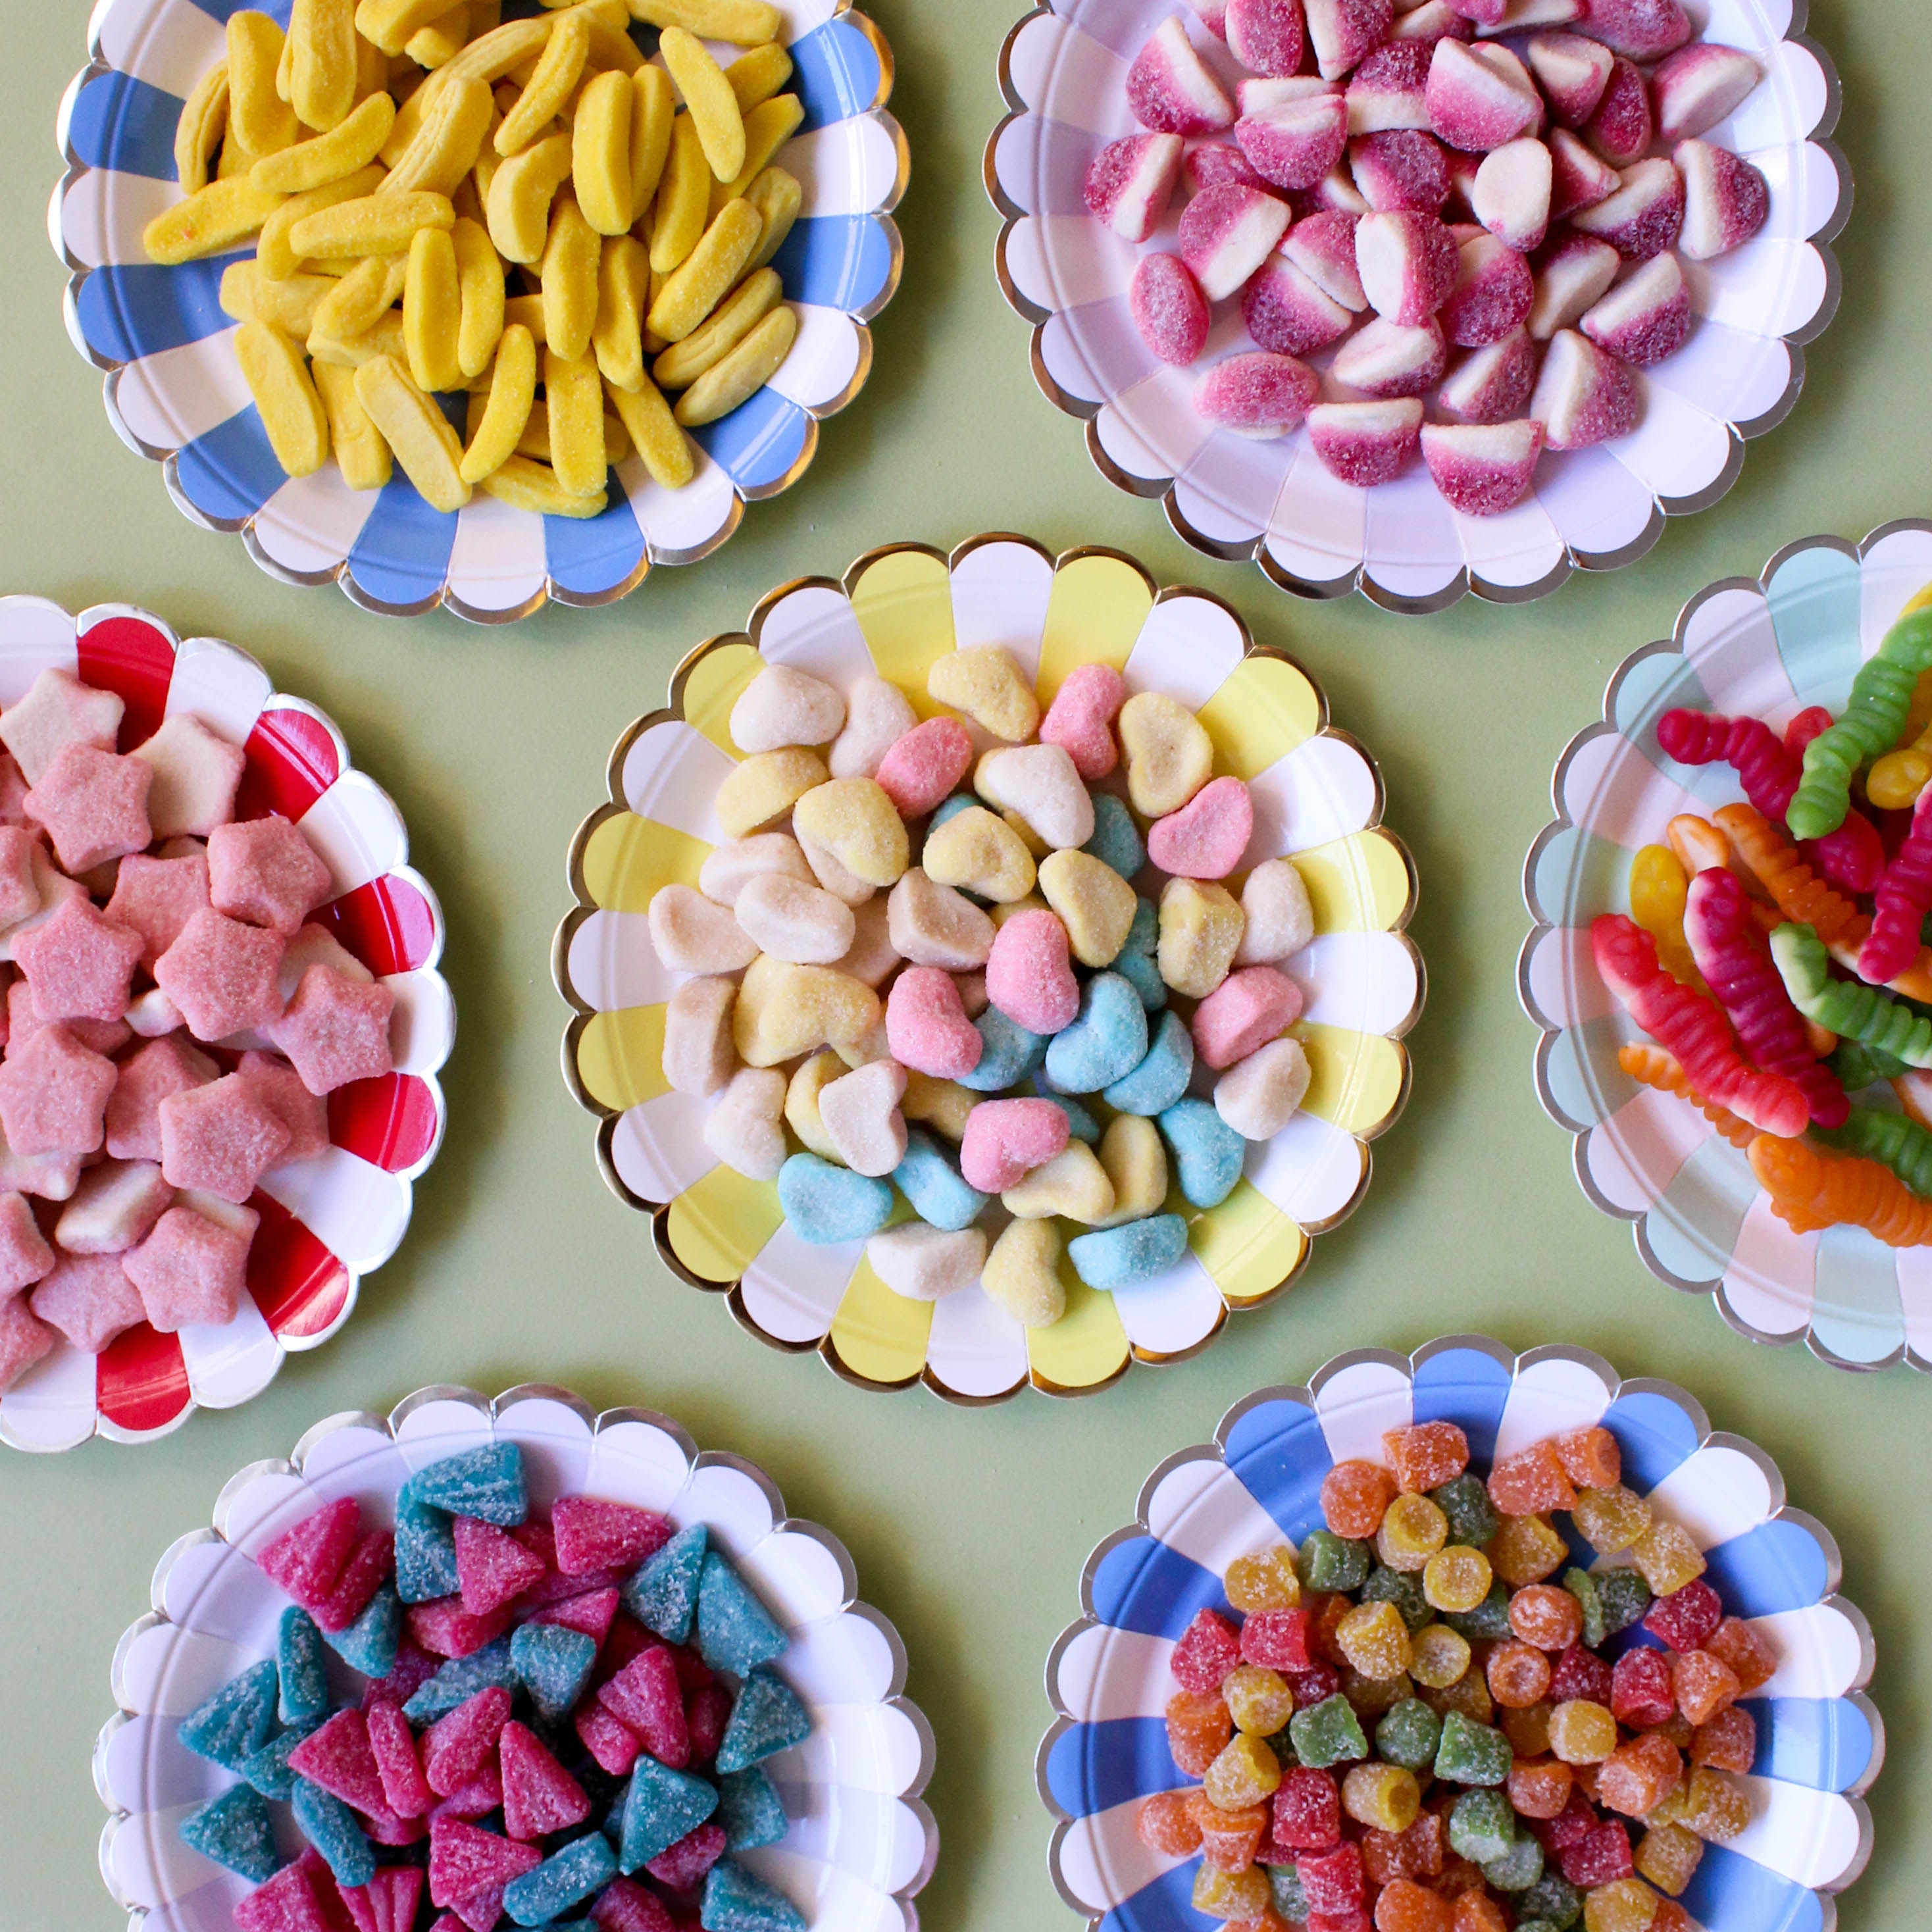 Featured image for “7 Simple Swaps for Sugary Sweets”